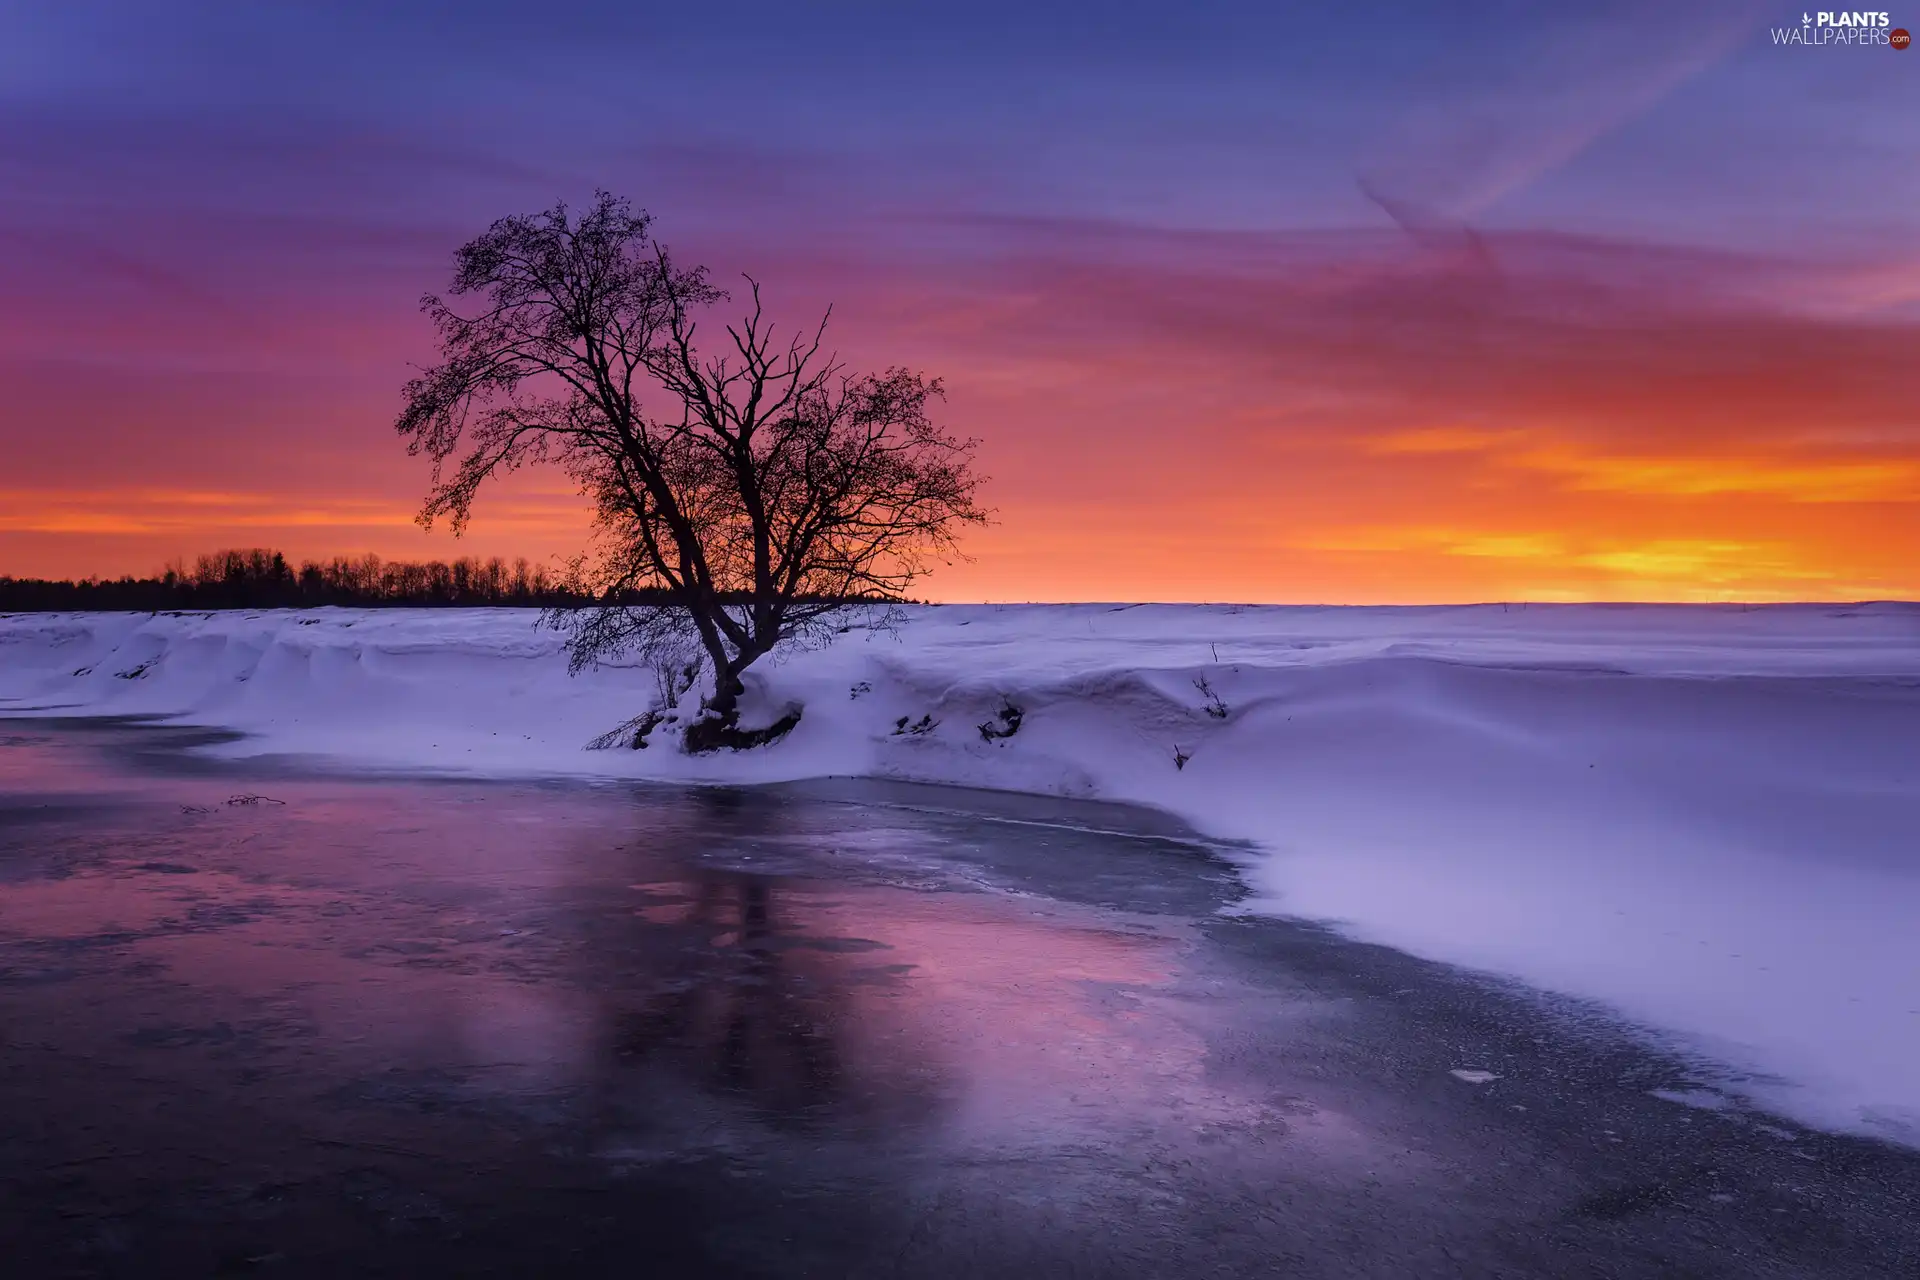 trees, River, snow, winter, Great Sunsets, Icecream